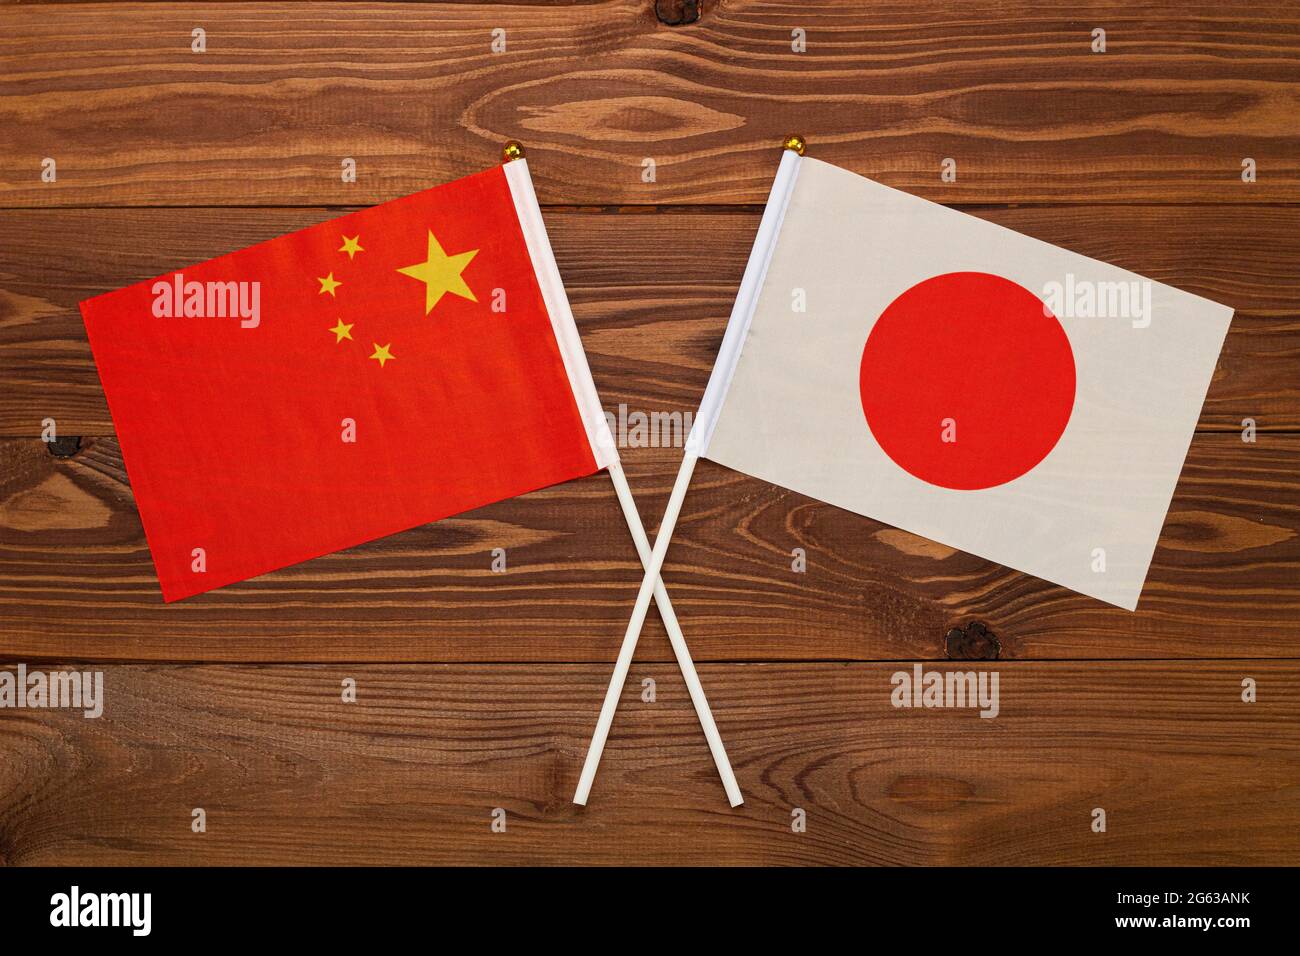 Flag of China and flag of Japan crossed with each other. The image illustrates the relationship between countries. Photography for news Stock Photo